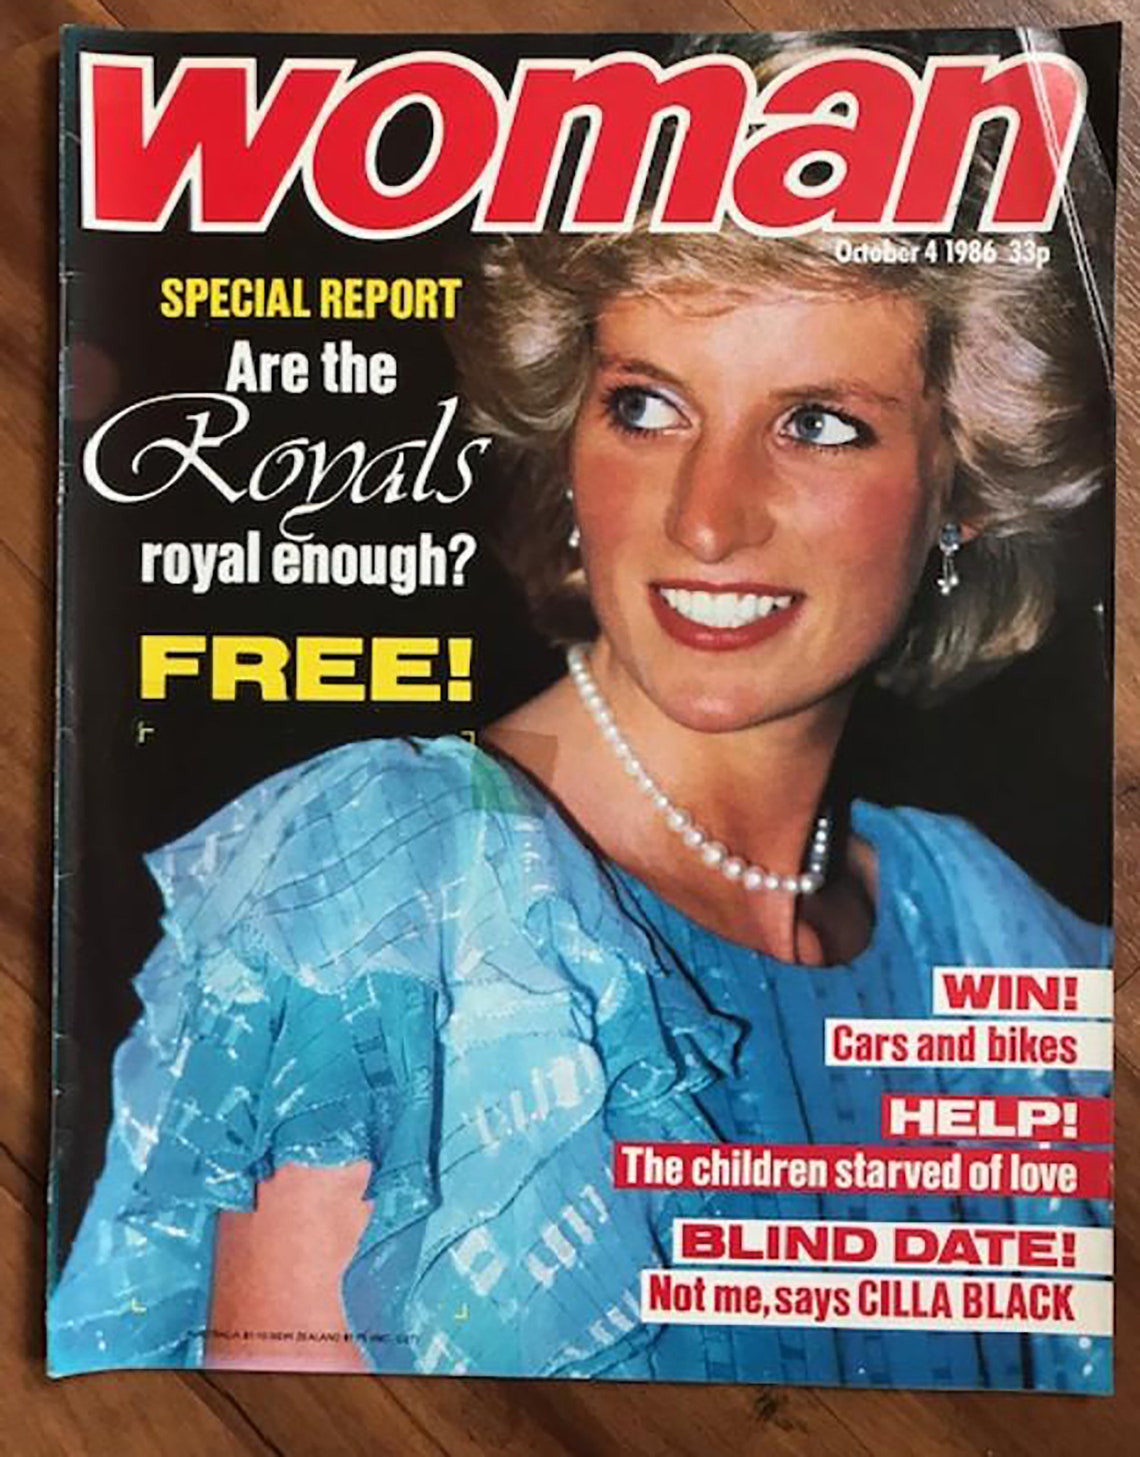 Woman Oct 4 1986 Original Vintage Weekly for Women Magazine | Etsy